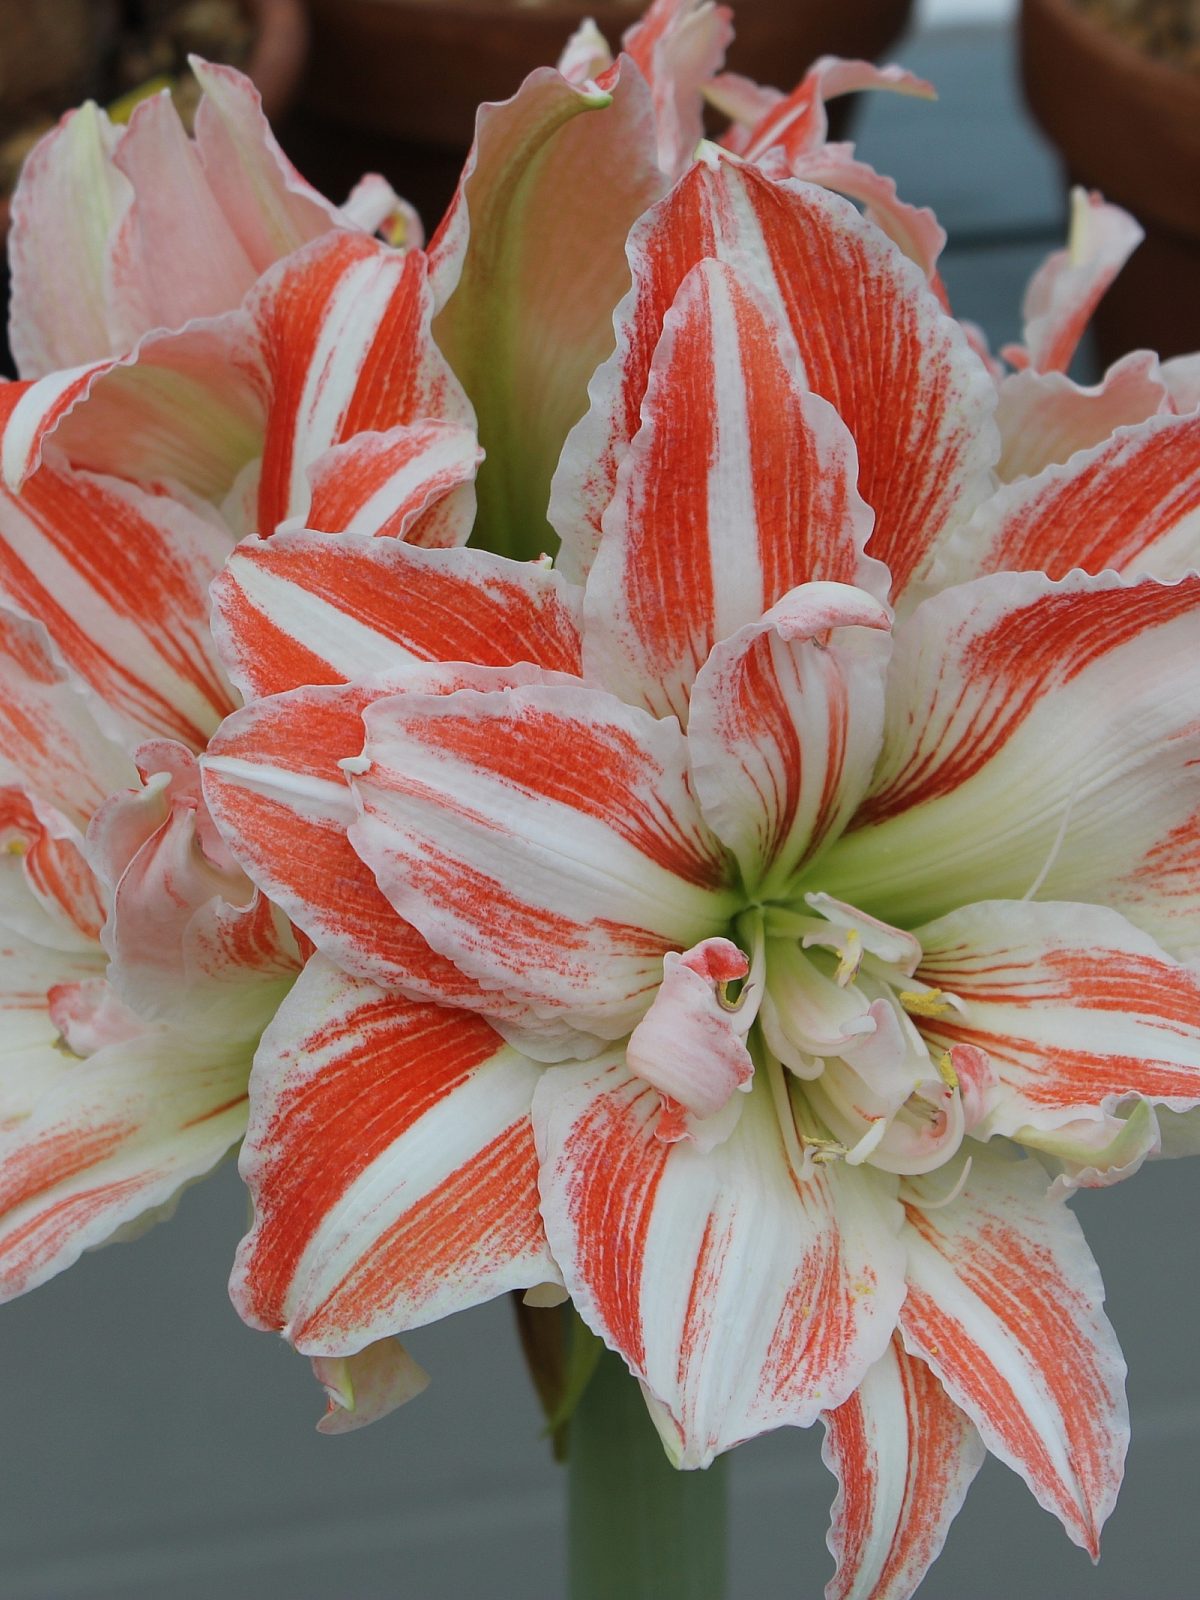 Red and White Amaryllis Flower